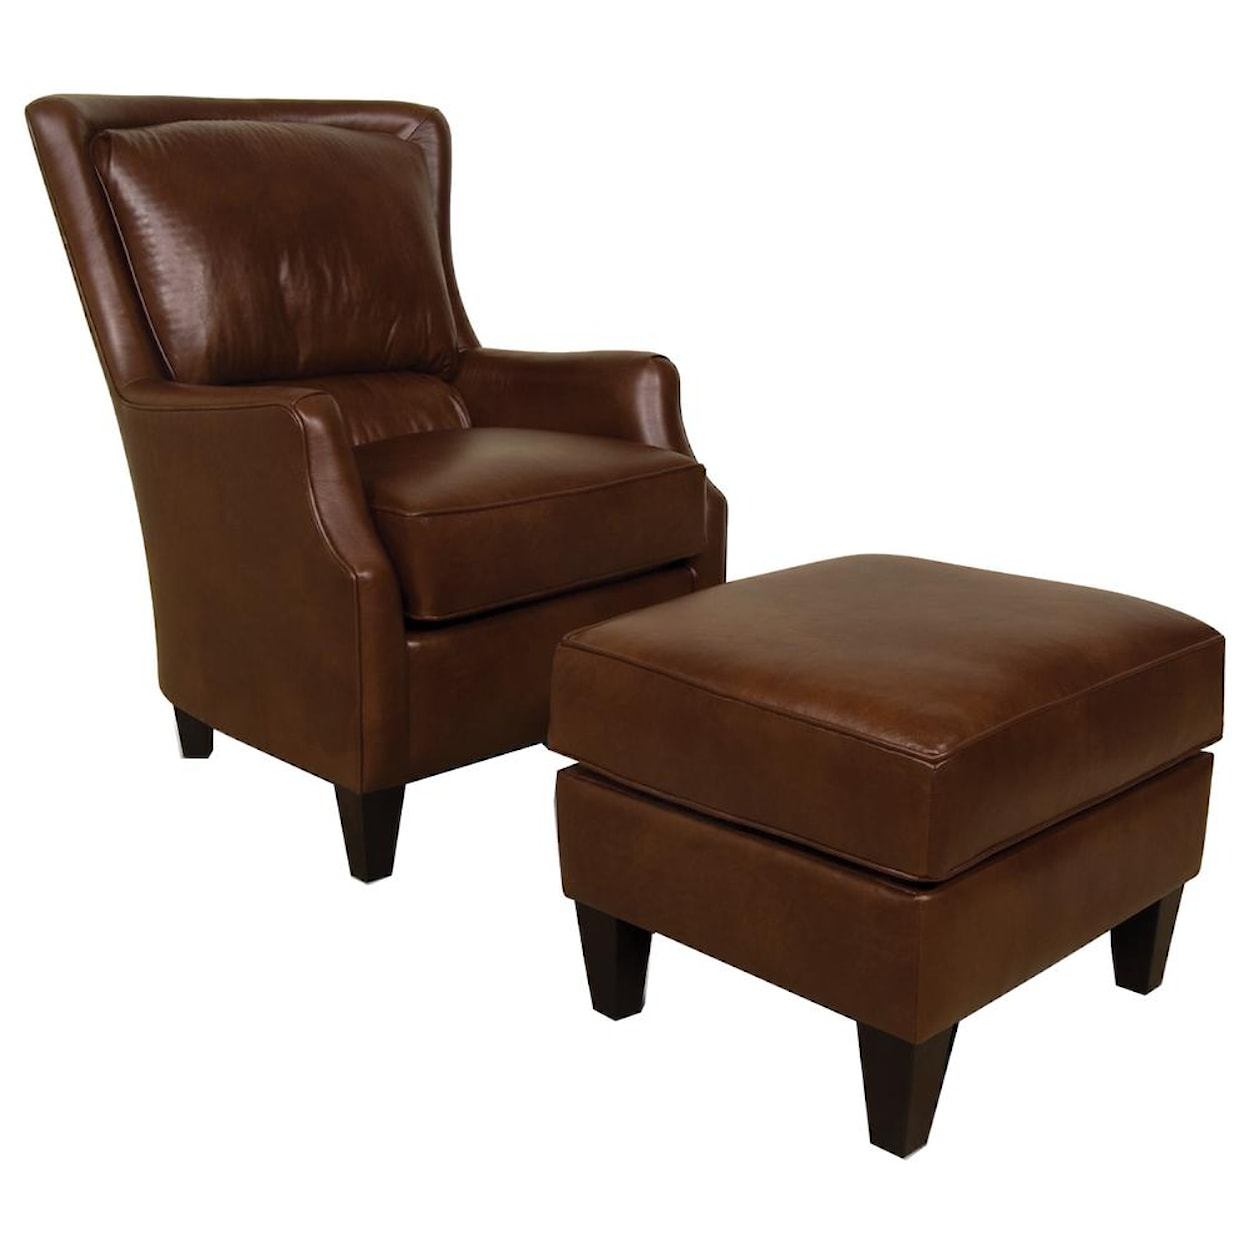 Dimensions 2910/AL Series Upholstered Club Chair and Ottoman